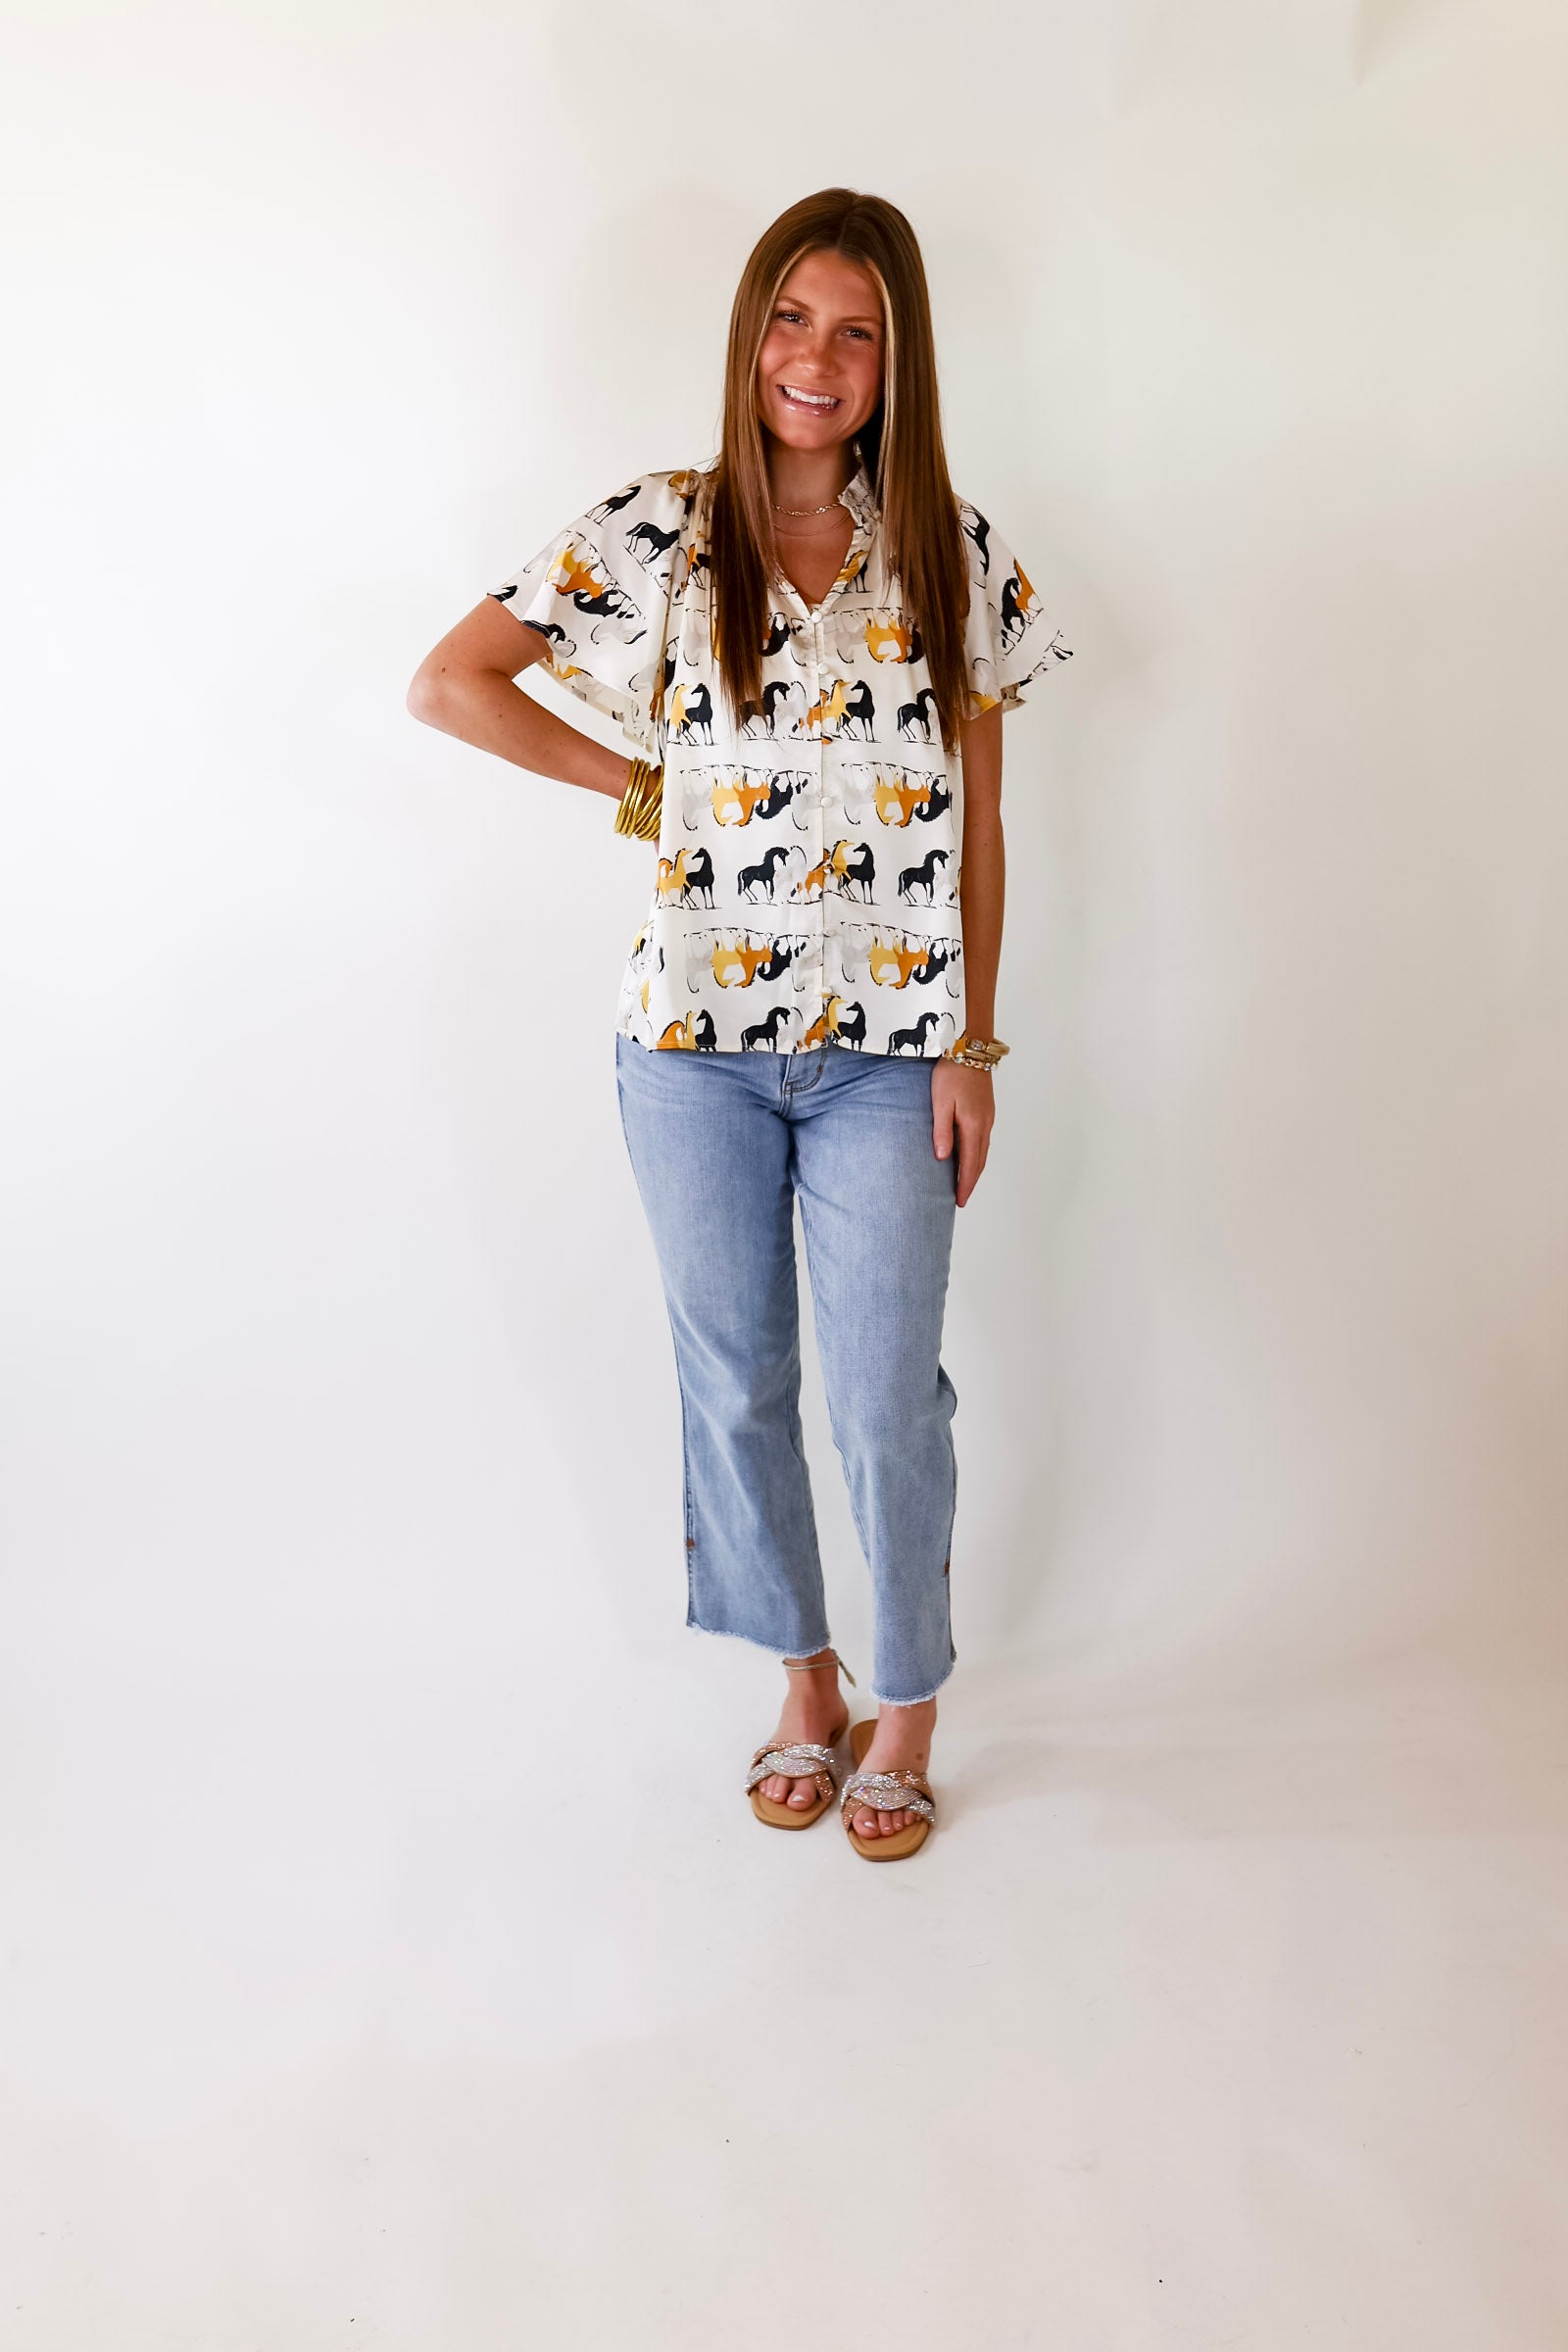 Away We Go Button Up Horse Print Shirt in Ivory - Giddy Up Glamour Boutique